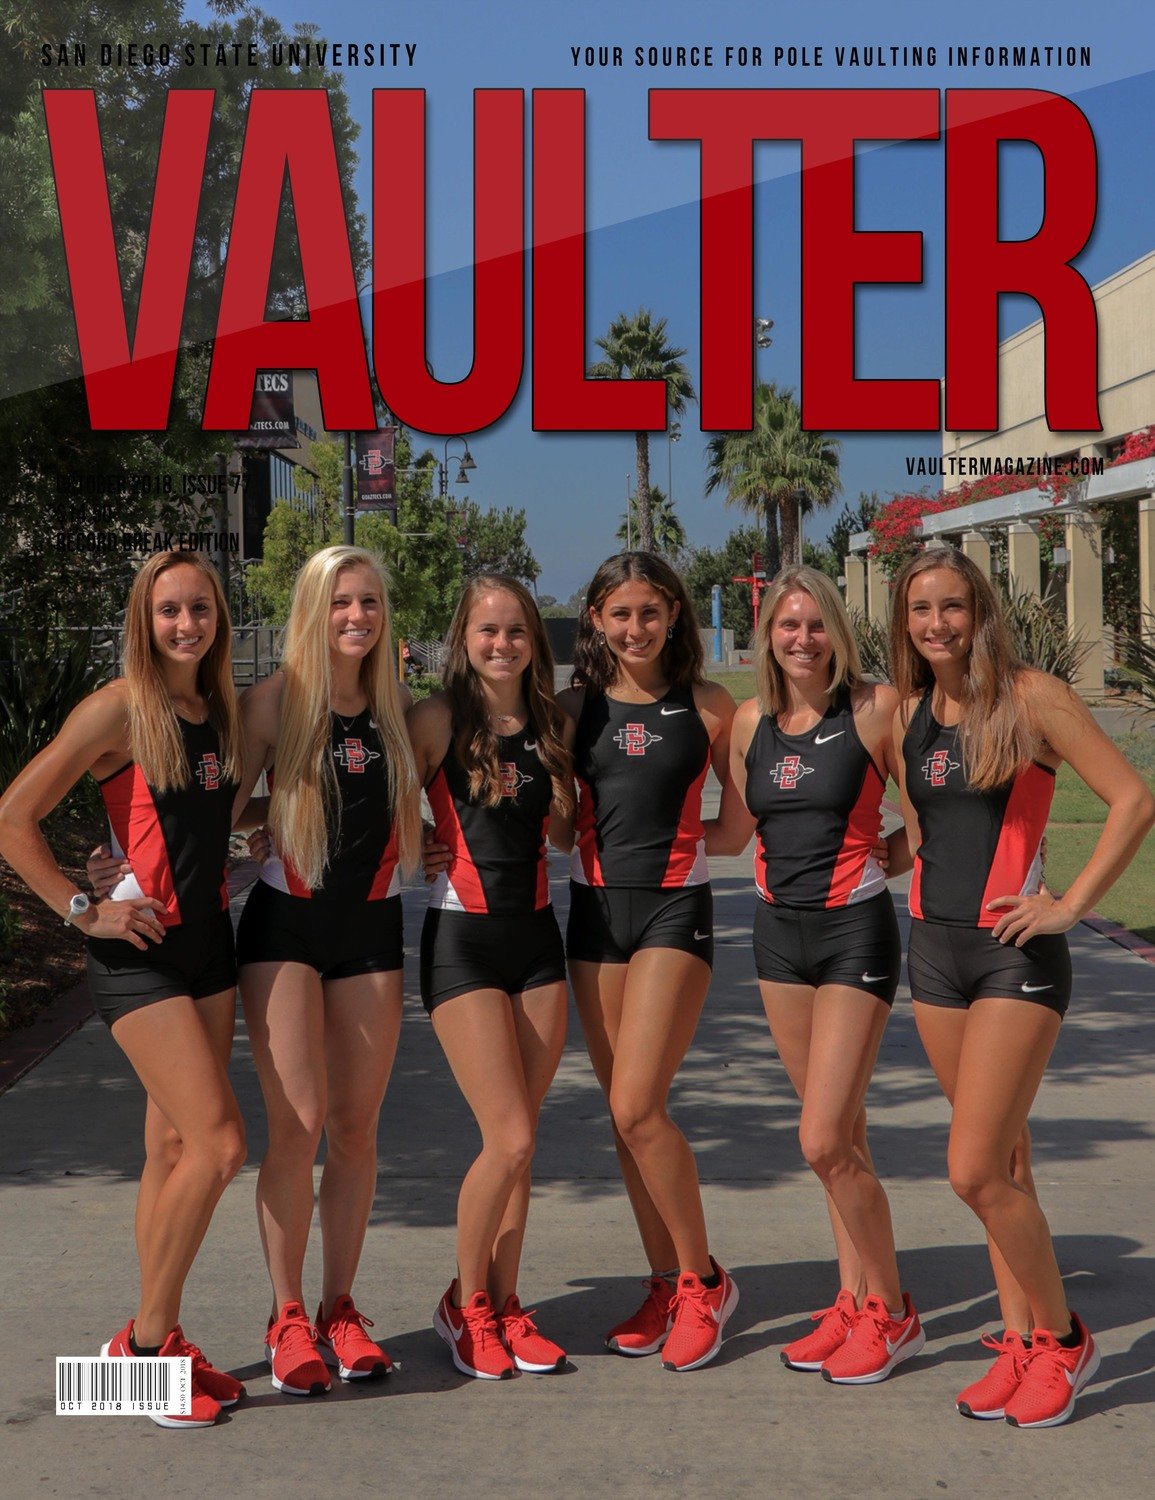 October 2018 San Diego State University Issue of Vaulter Magazine Cover Poster for Vaulter Magazine